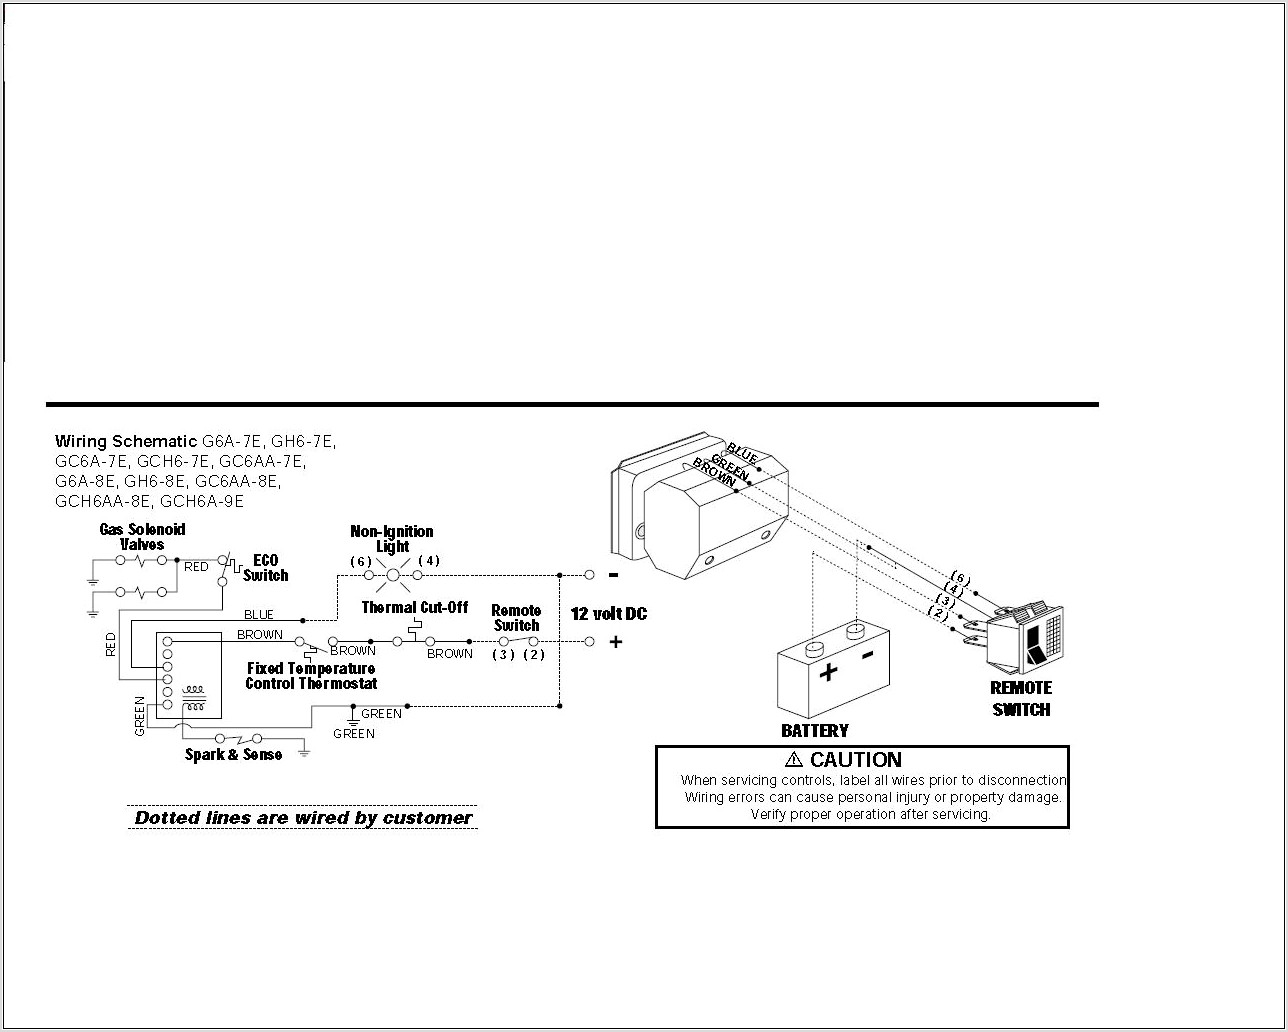 Atwood Hot Water Heater Wiring Diagram